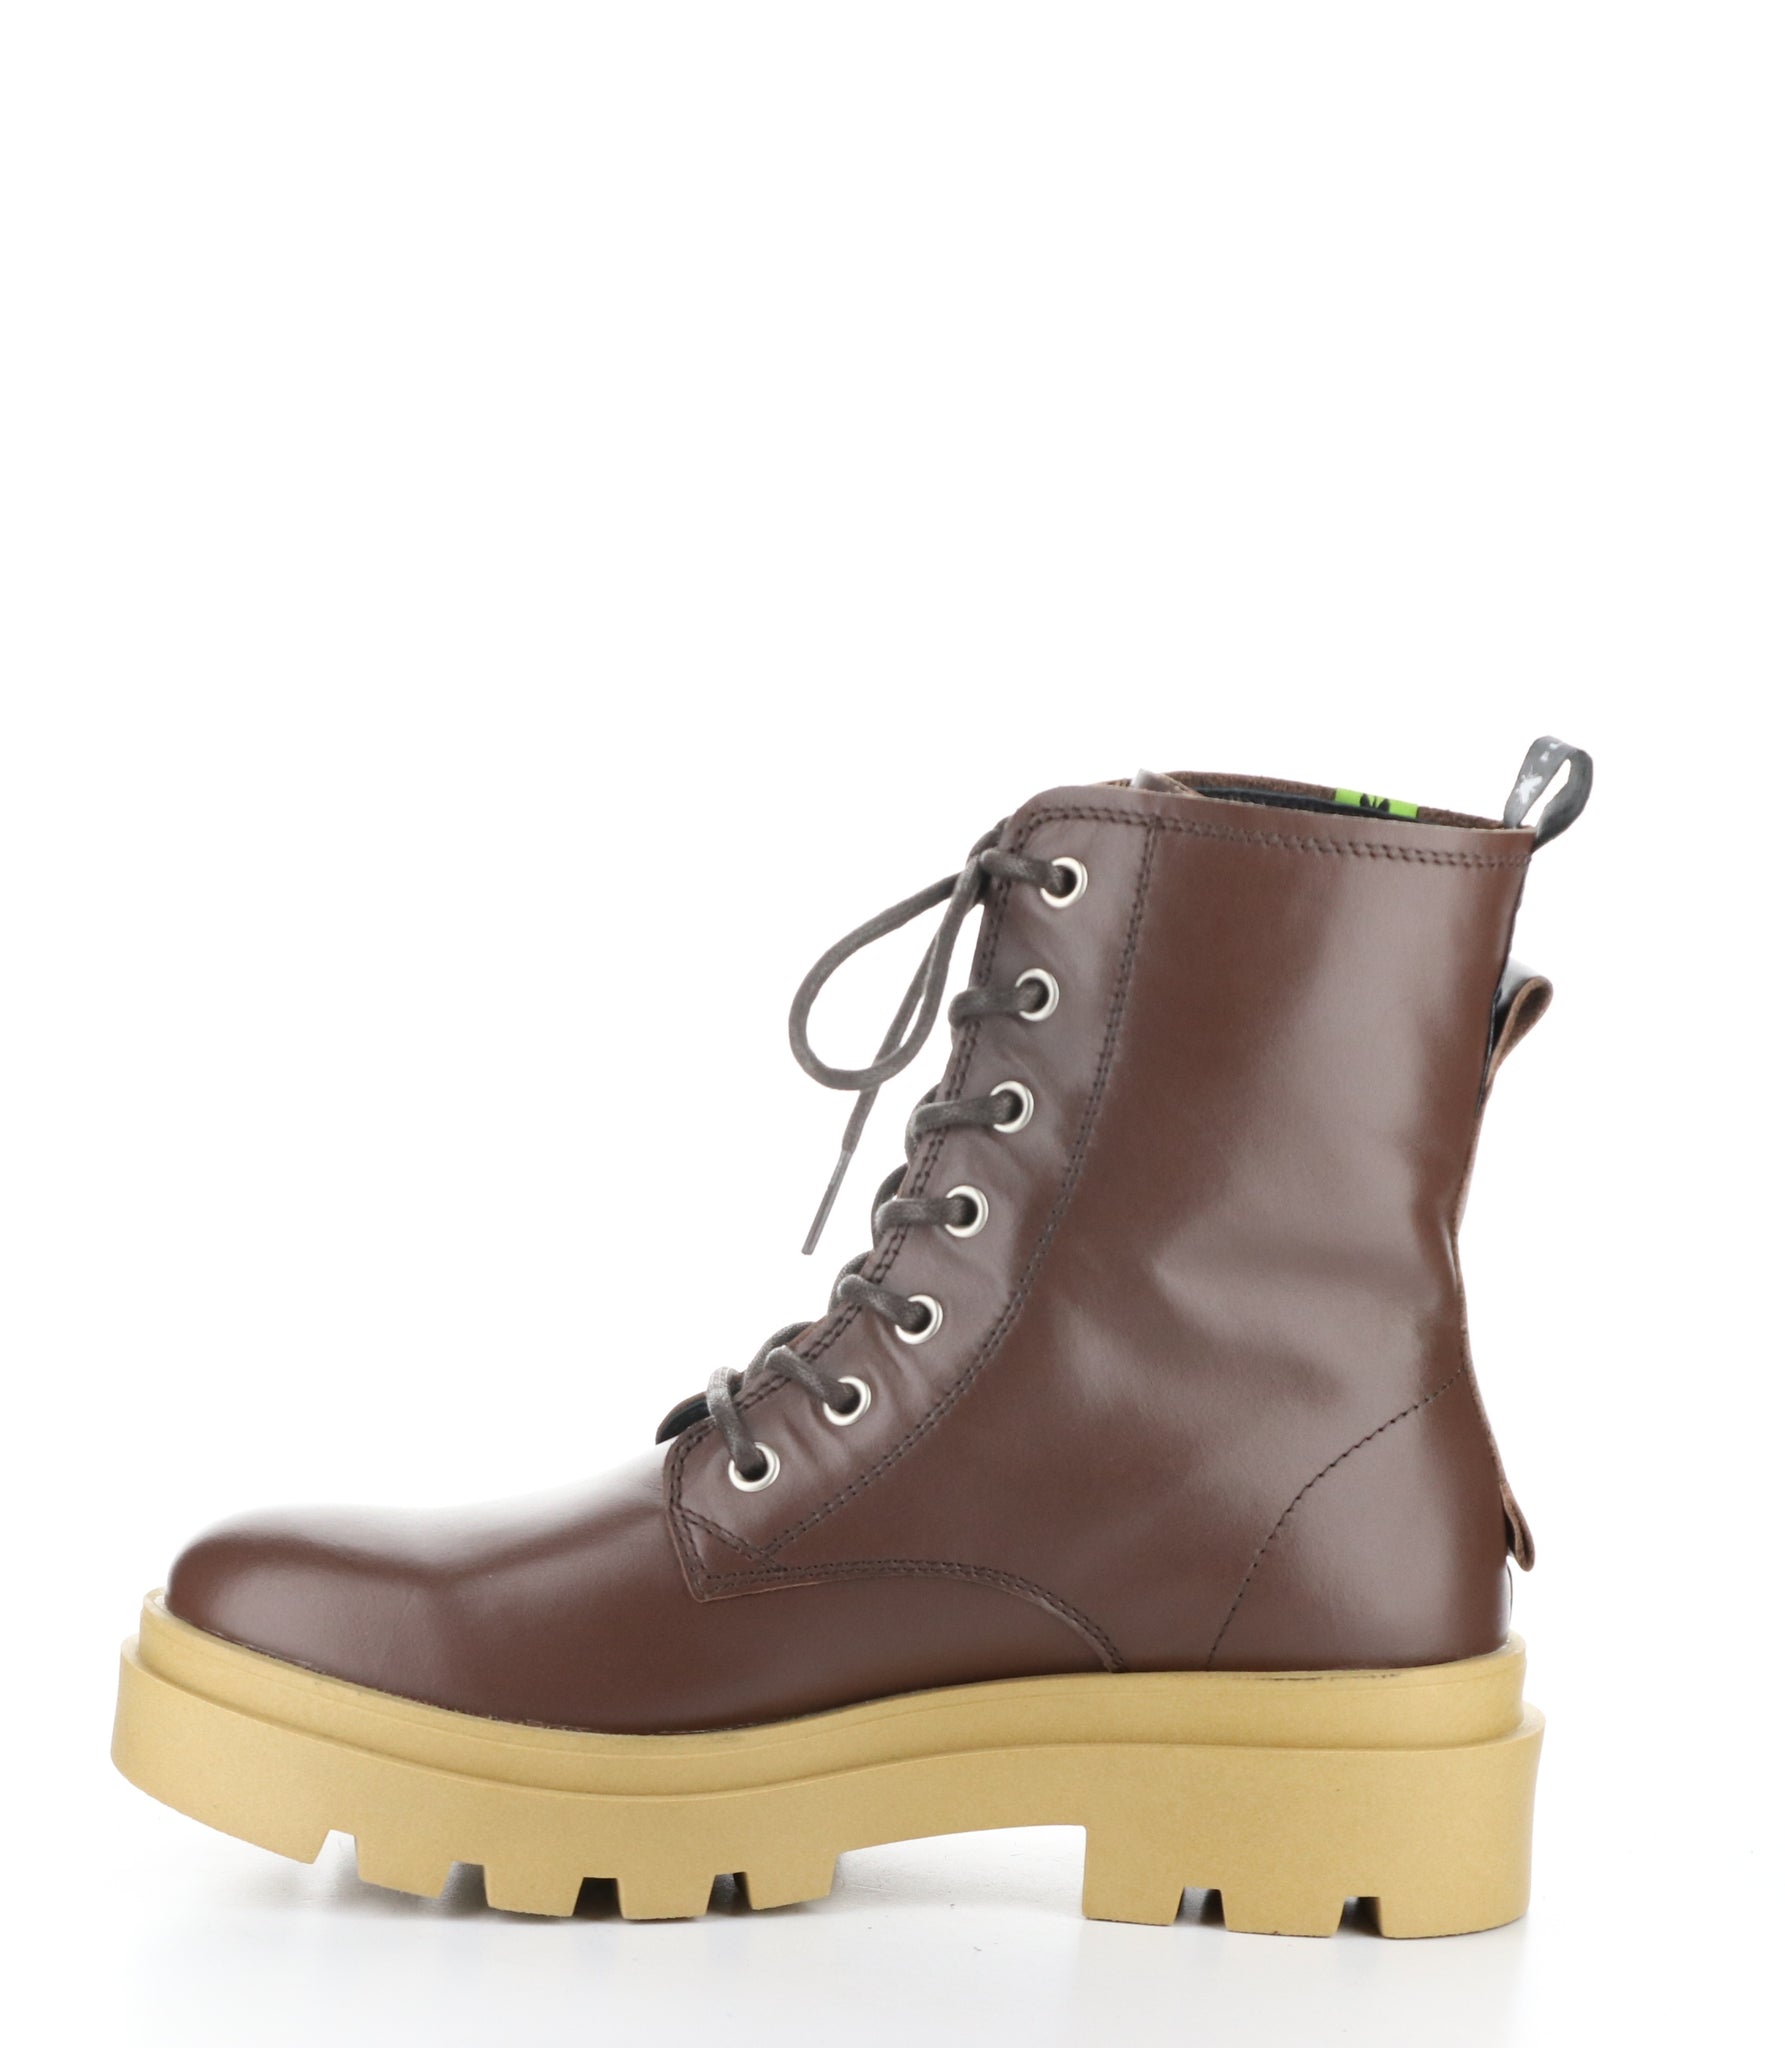 Fly London "Jacy" Brown Millitary Boot